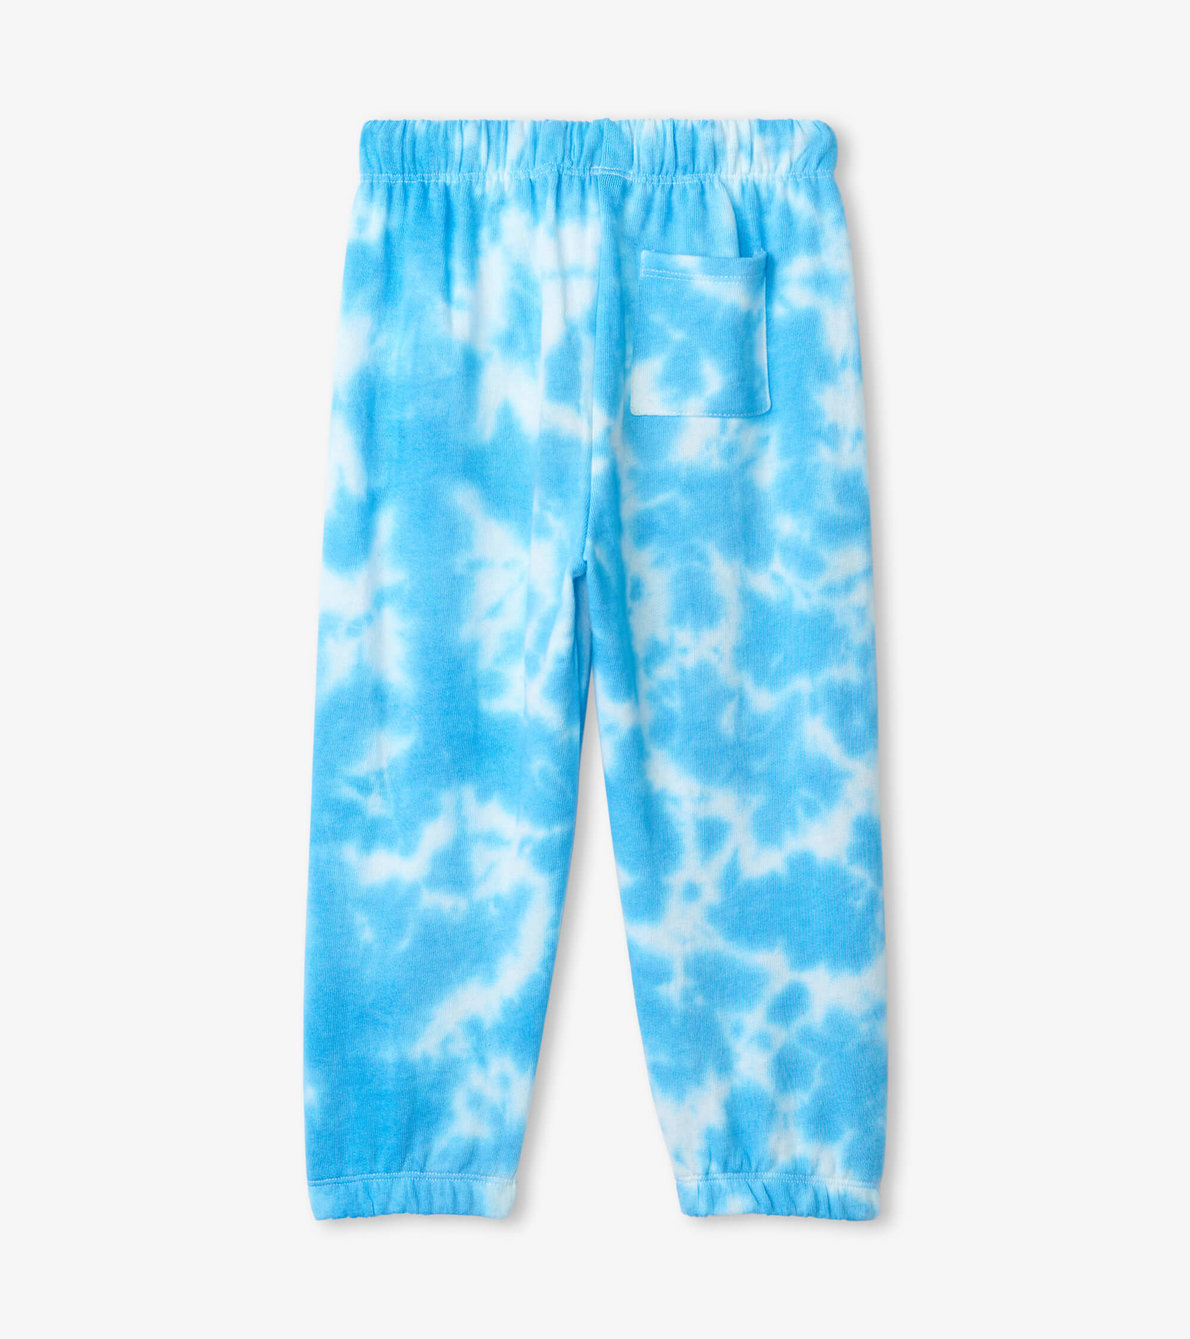 View larger image of Blue Sky Tie Dye Relaxed Fit Joggers